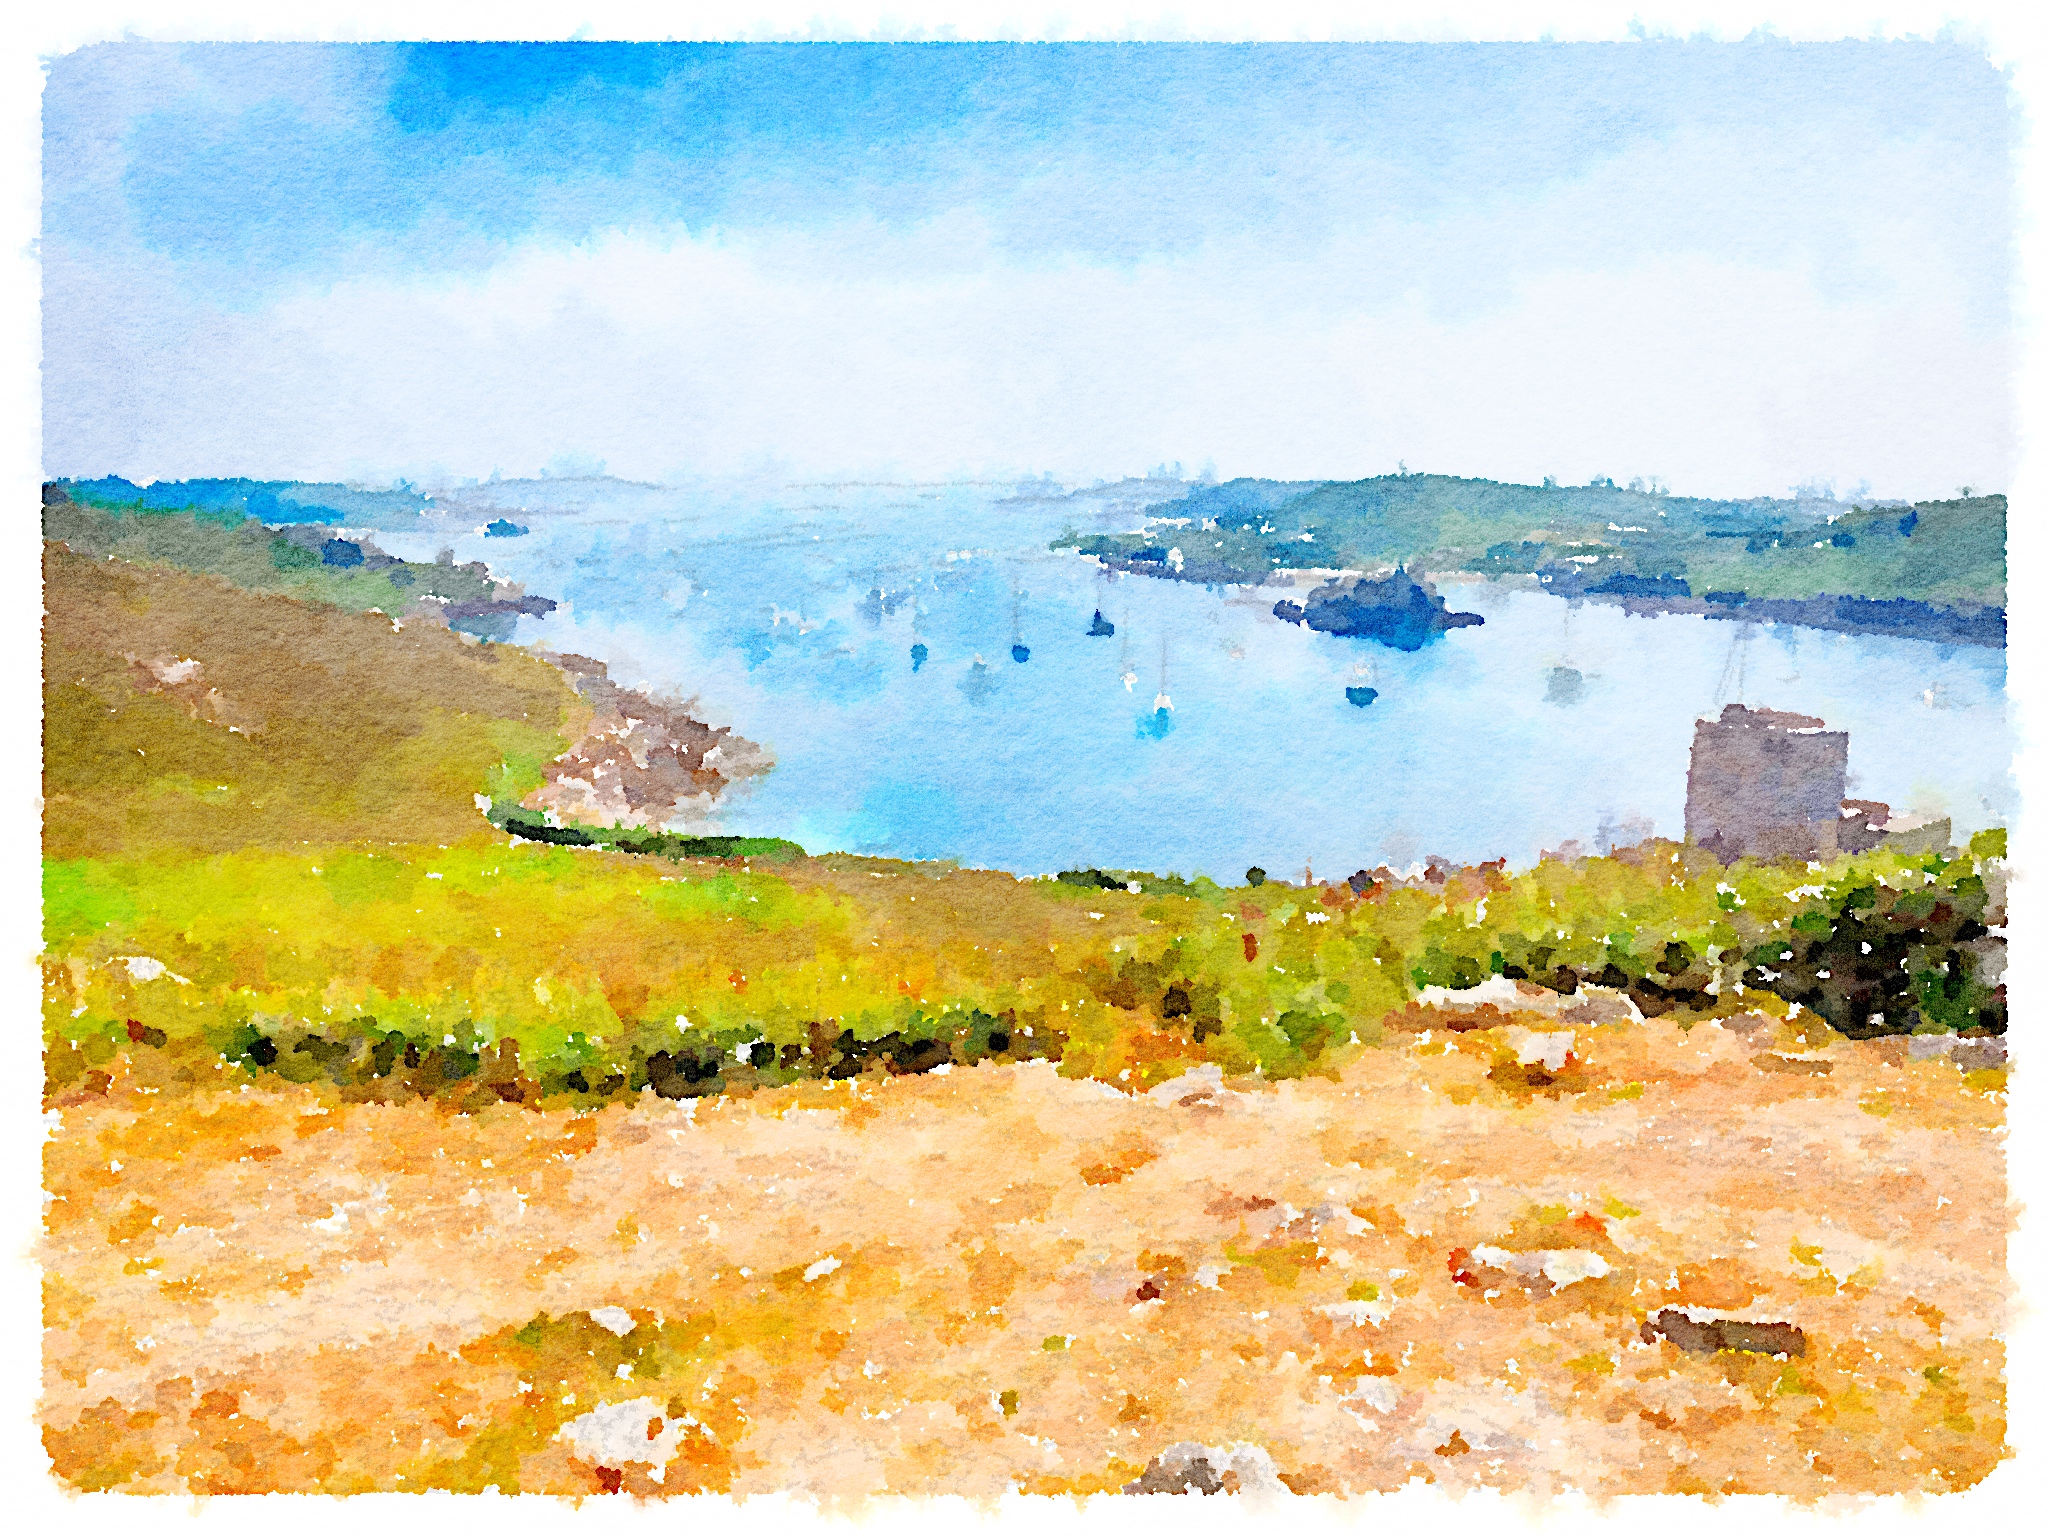 View from King Charles Castle over to Bryher showing Cromwell's Castle - Tresco